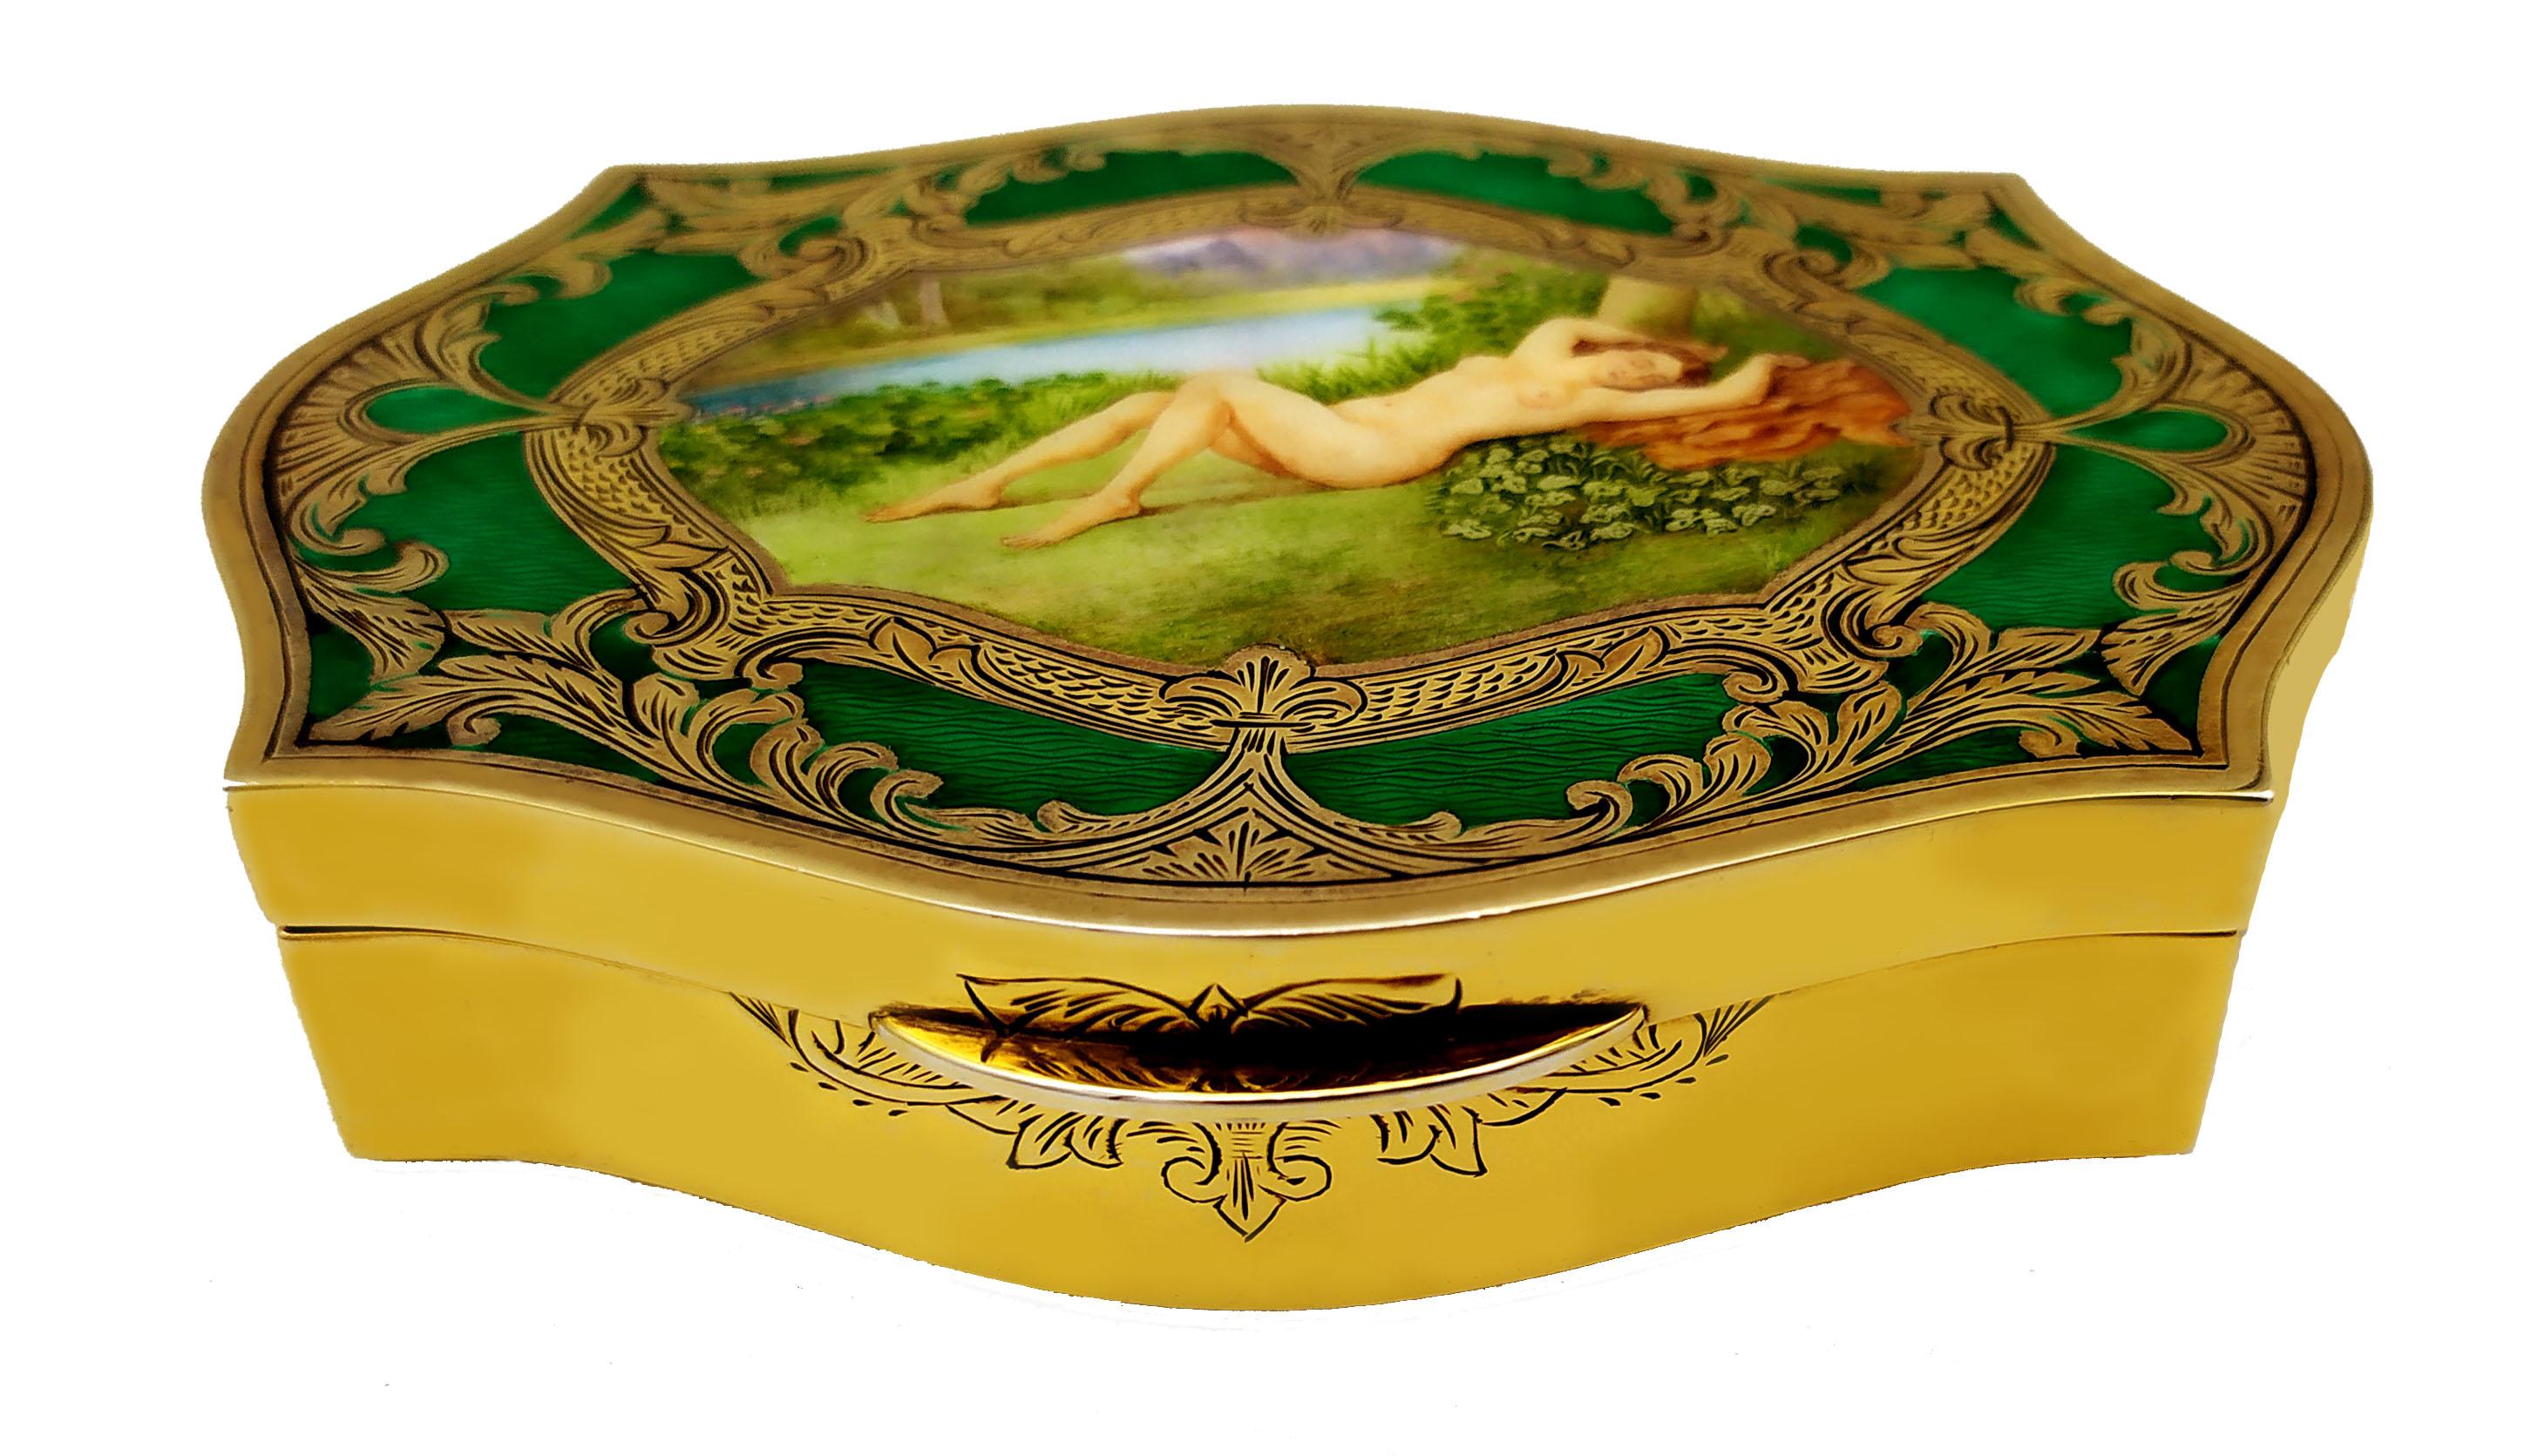 Baroque style shaped table box in 925/1000 sterling silver gold plated with fine hand engraving interspersed with spaces with translucent fired enamels on guillochè and a beautiful hand-painted enamelled miniature in the center by the painter Romano